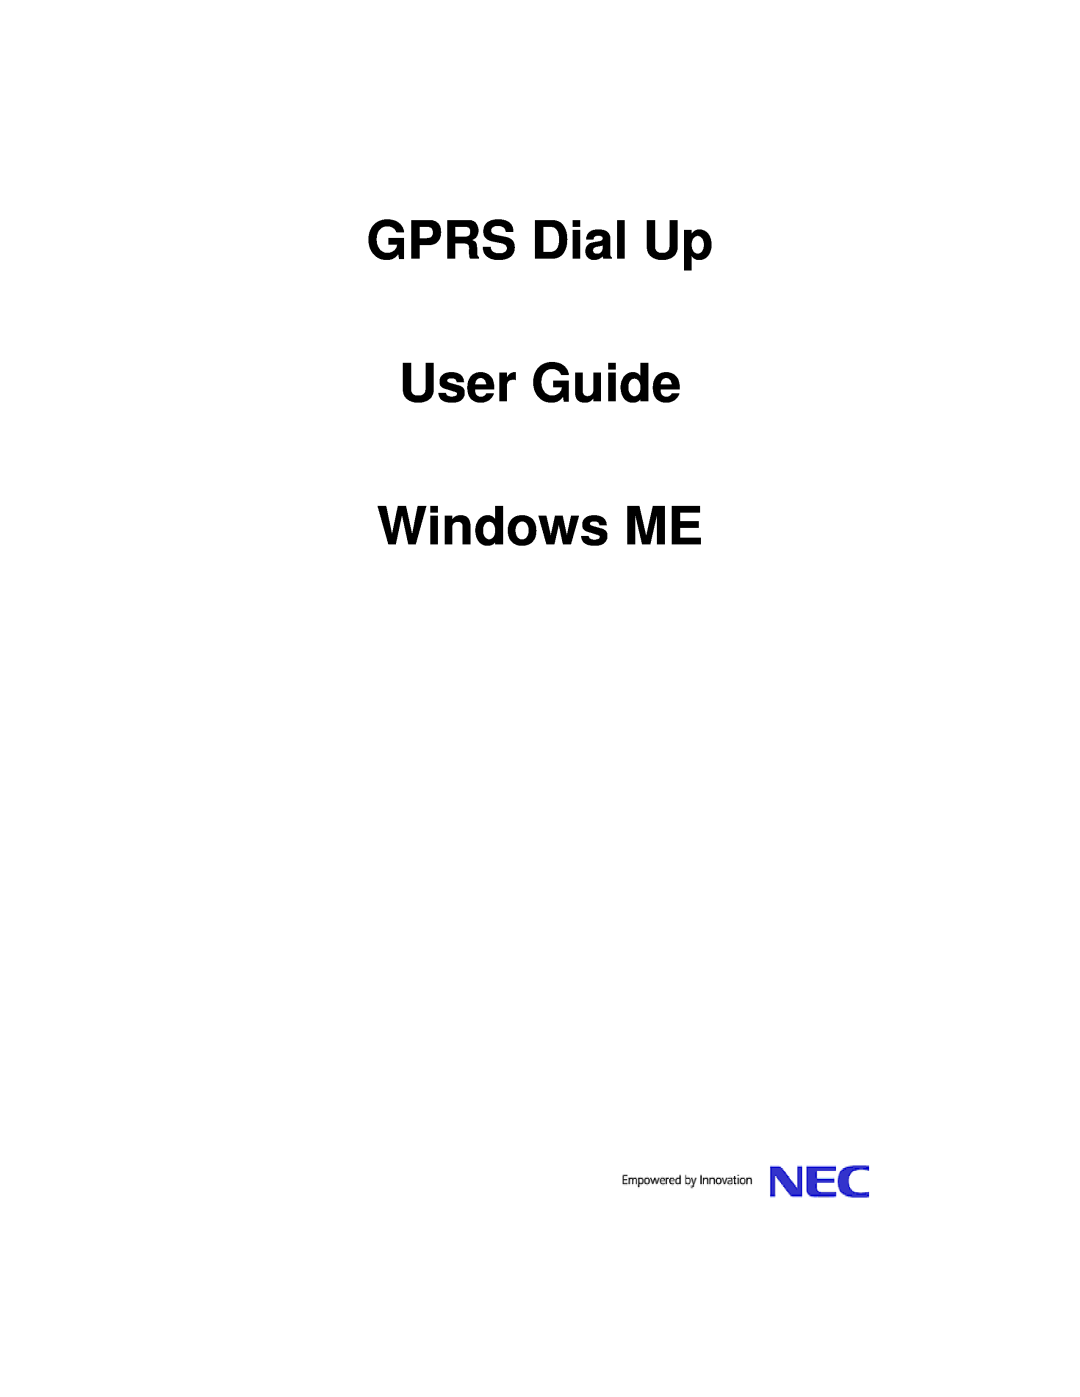 NEC 1.1 manual GPRS Dial Up, User Guide Windows ME 